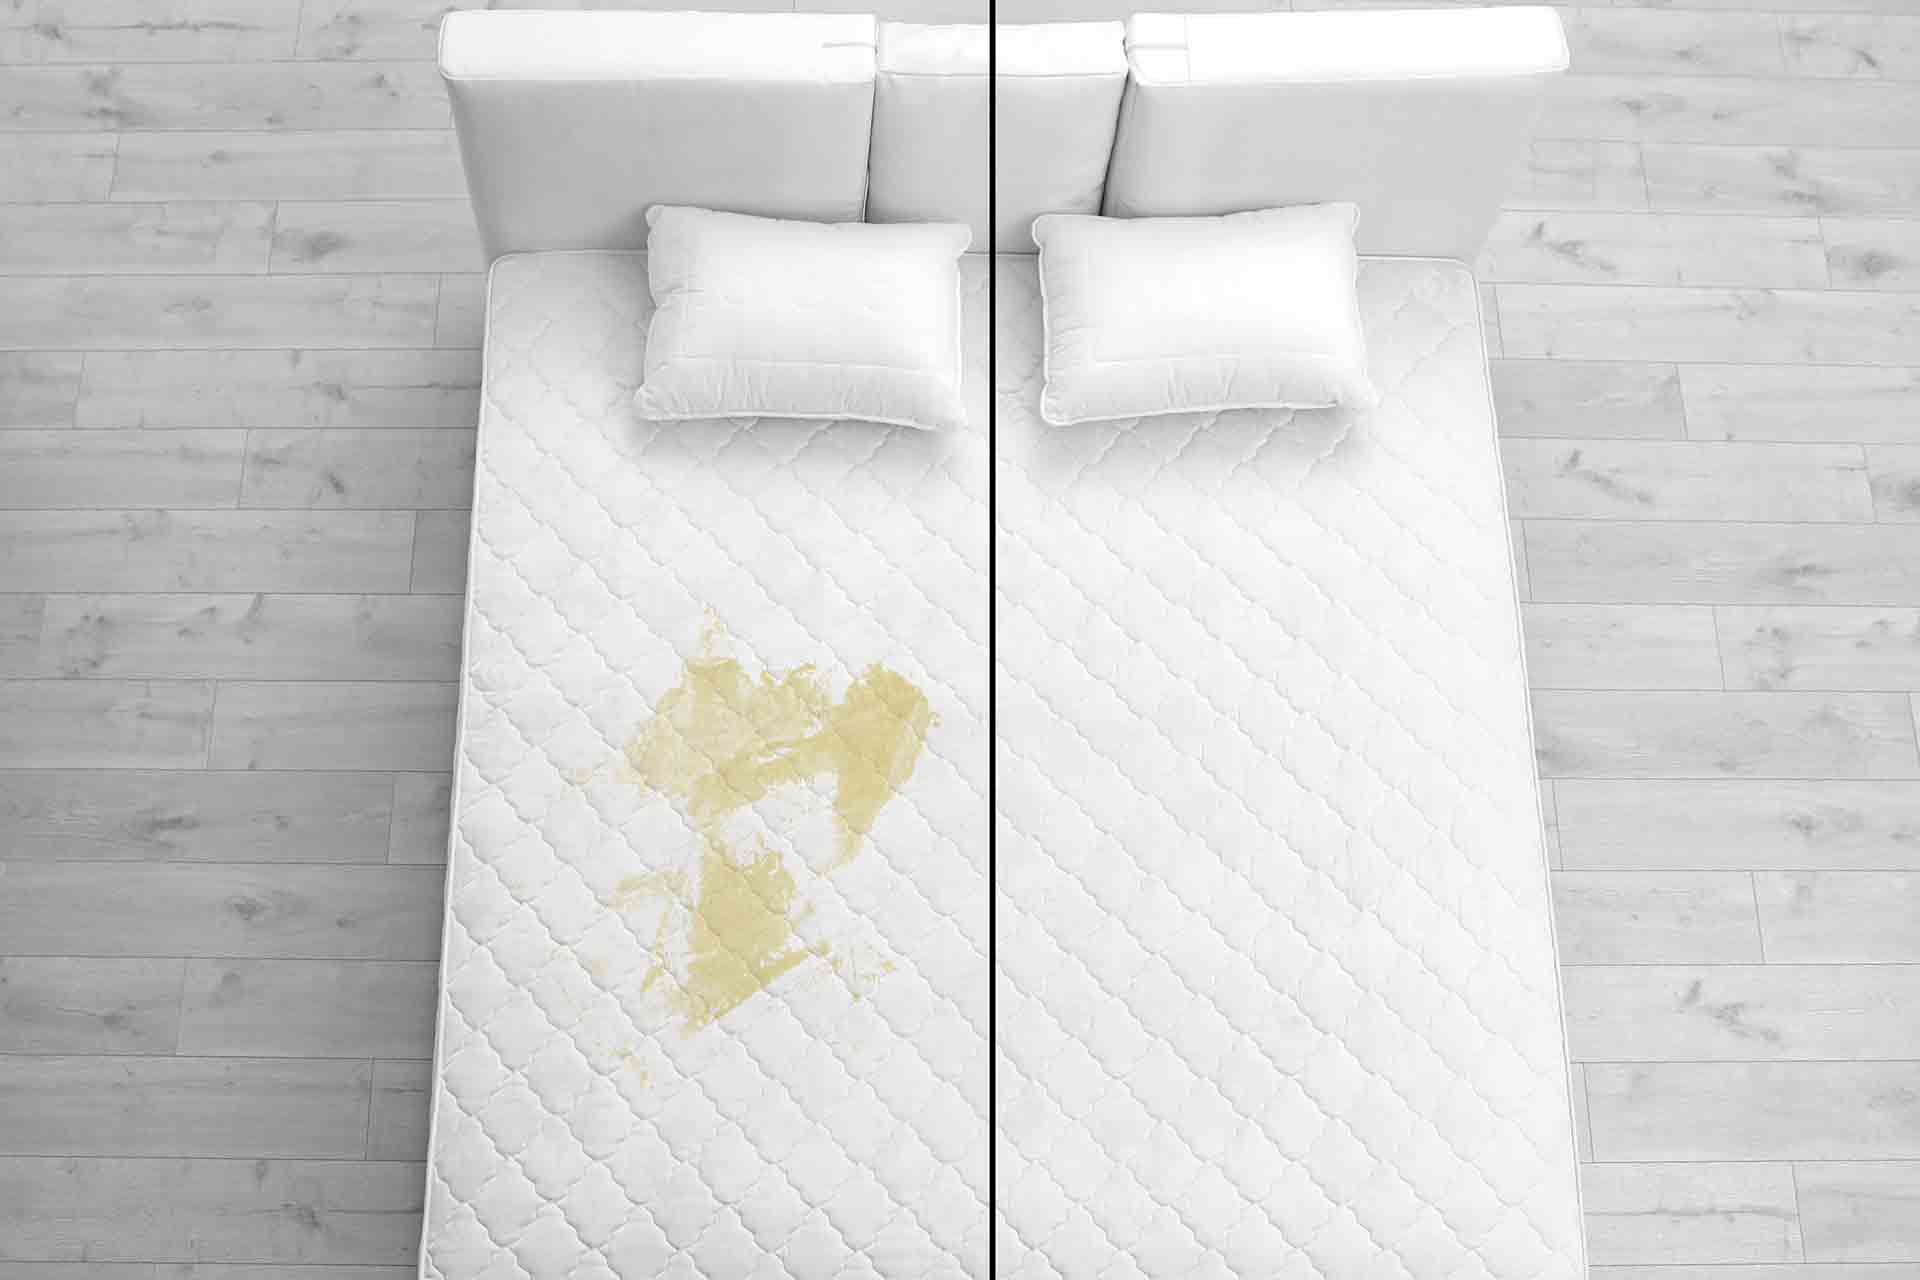 How to Clean a Dirty Mattress